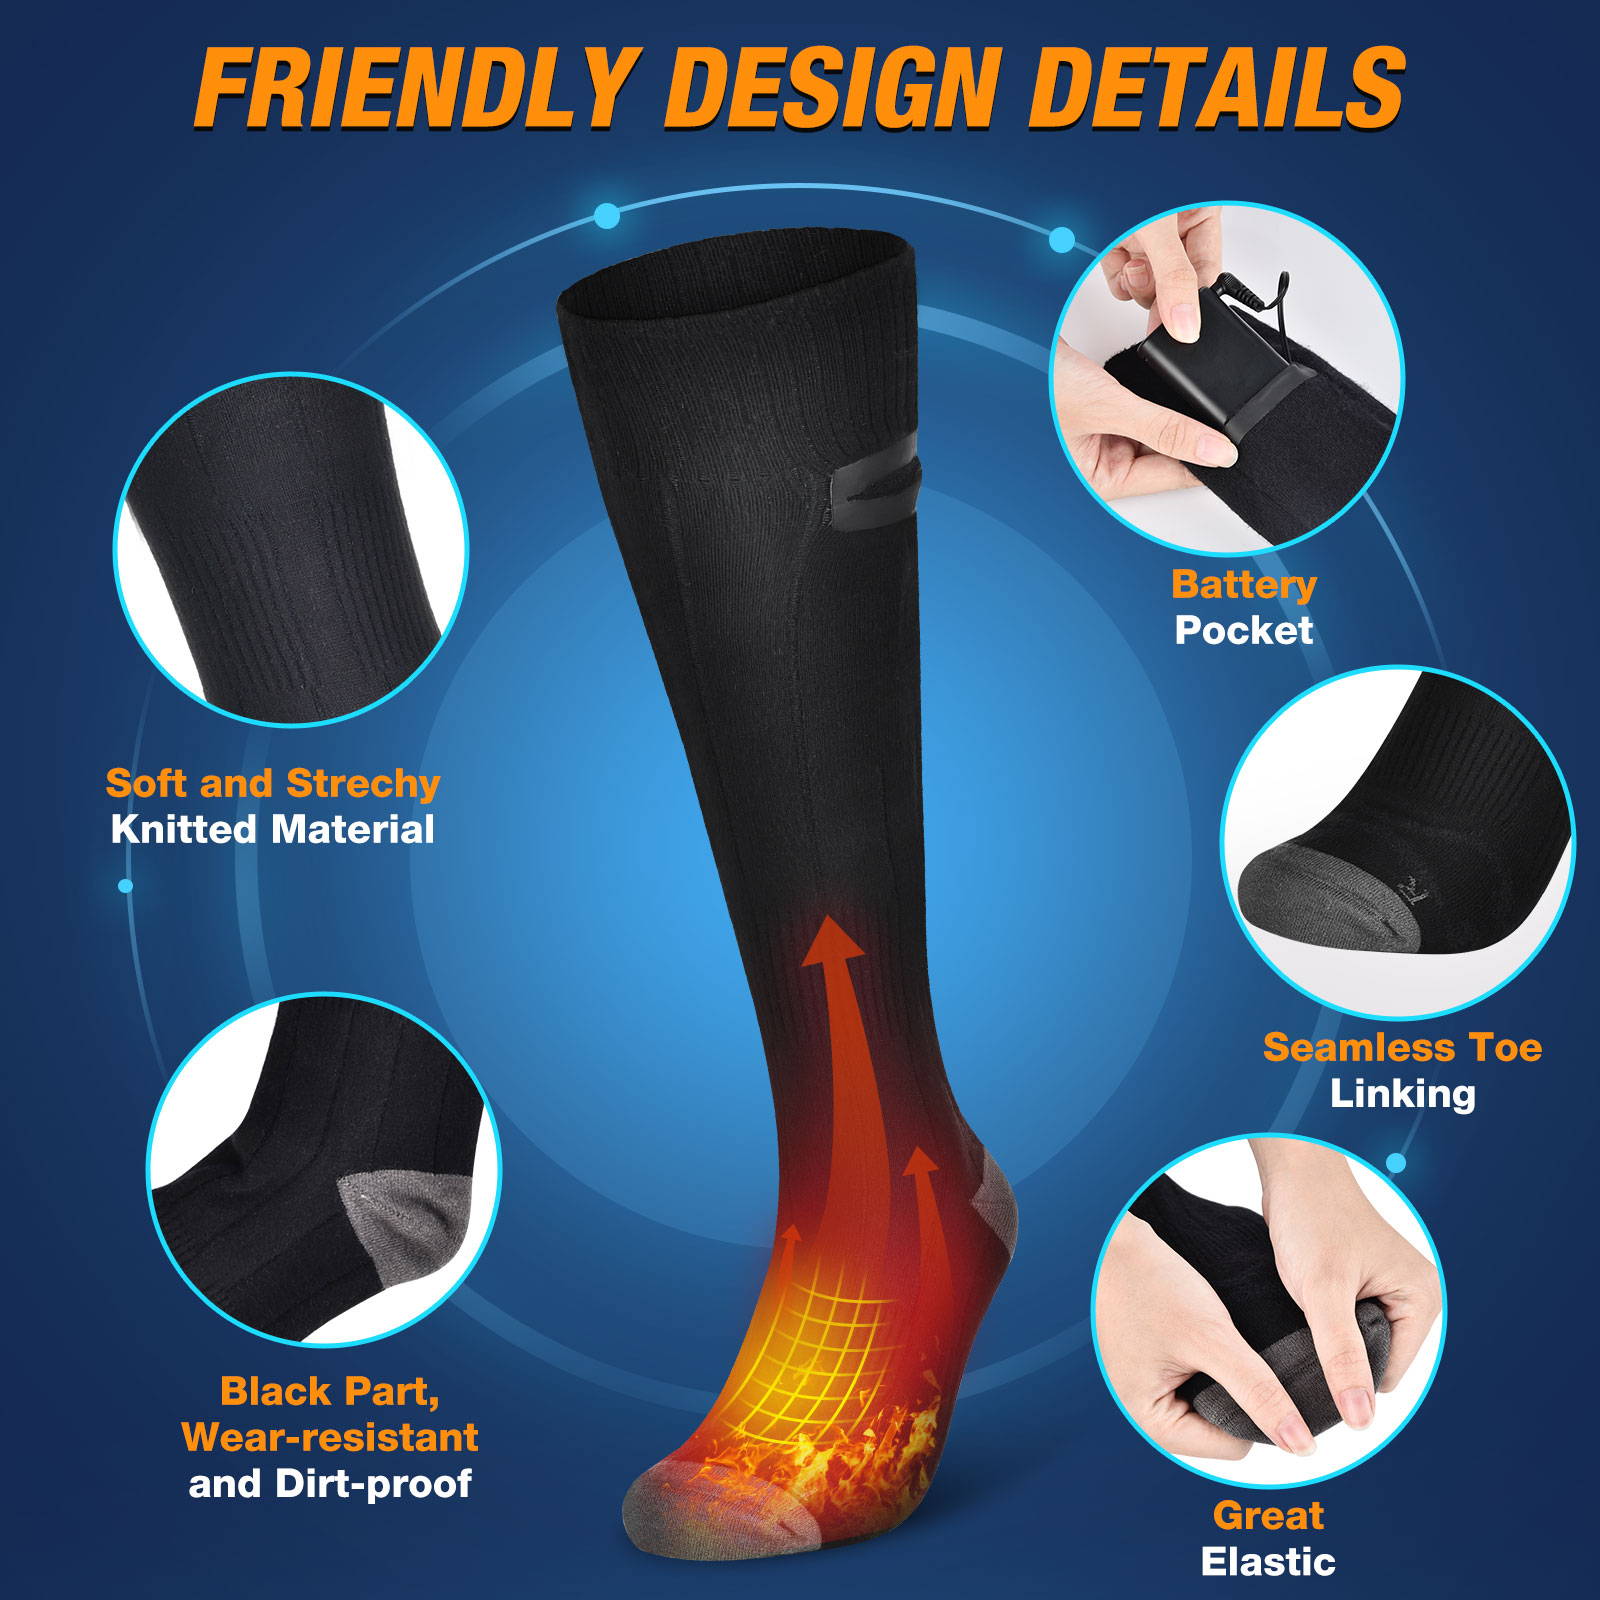 Rechargeable heated socks